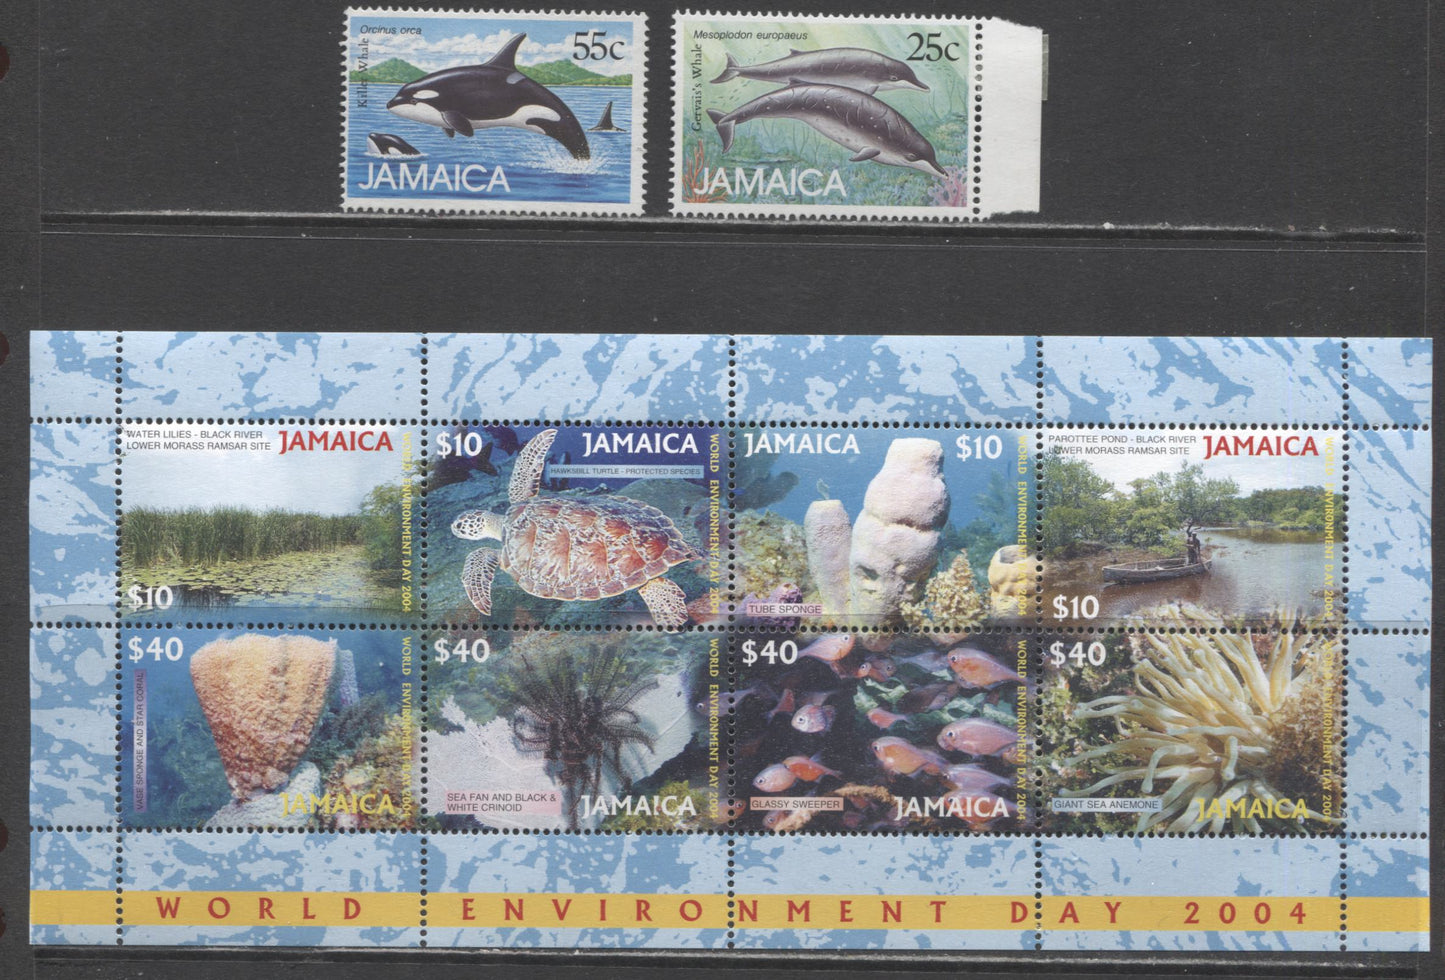 Lot 54 Jamaica SC#684/985 1988-2004 Marine Mammals - Envionmental Day Issues, 3 VFOG/NH Singles & Souvenir Sheet, Click on Listing to See ALL Pictures, 2017 Scott Cat. $16.25